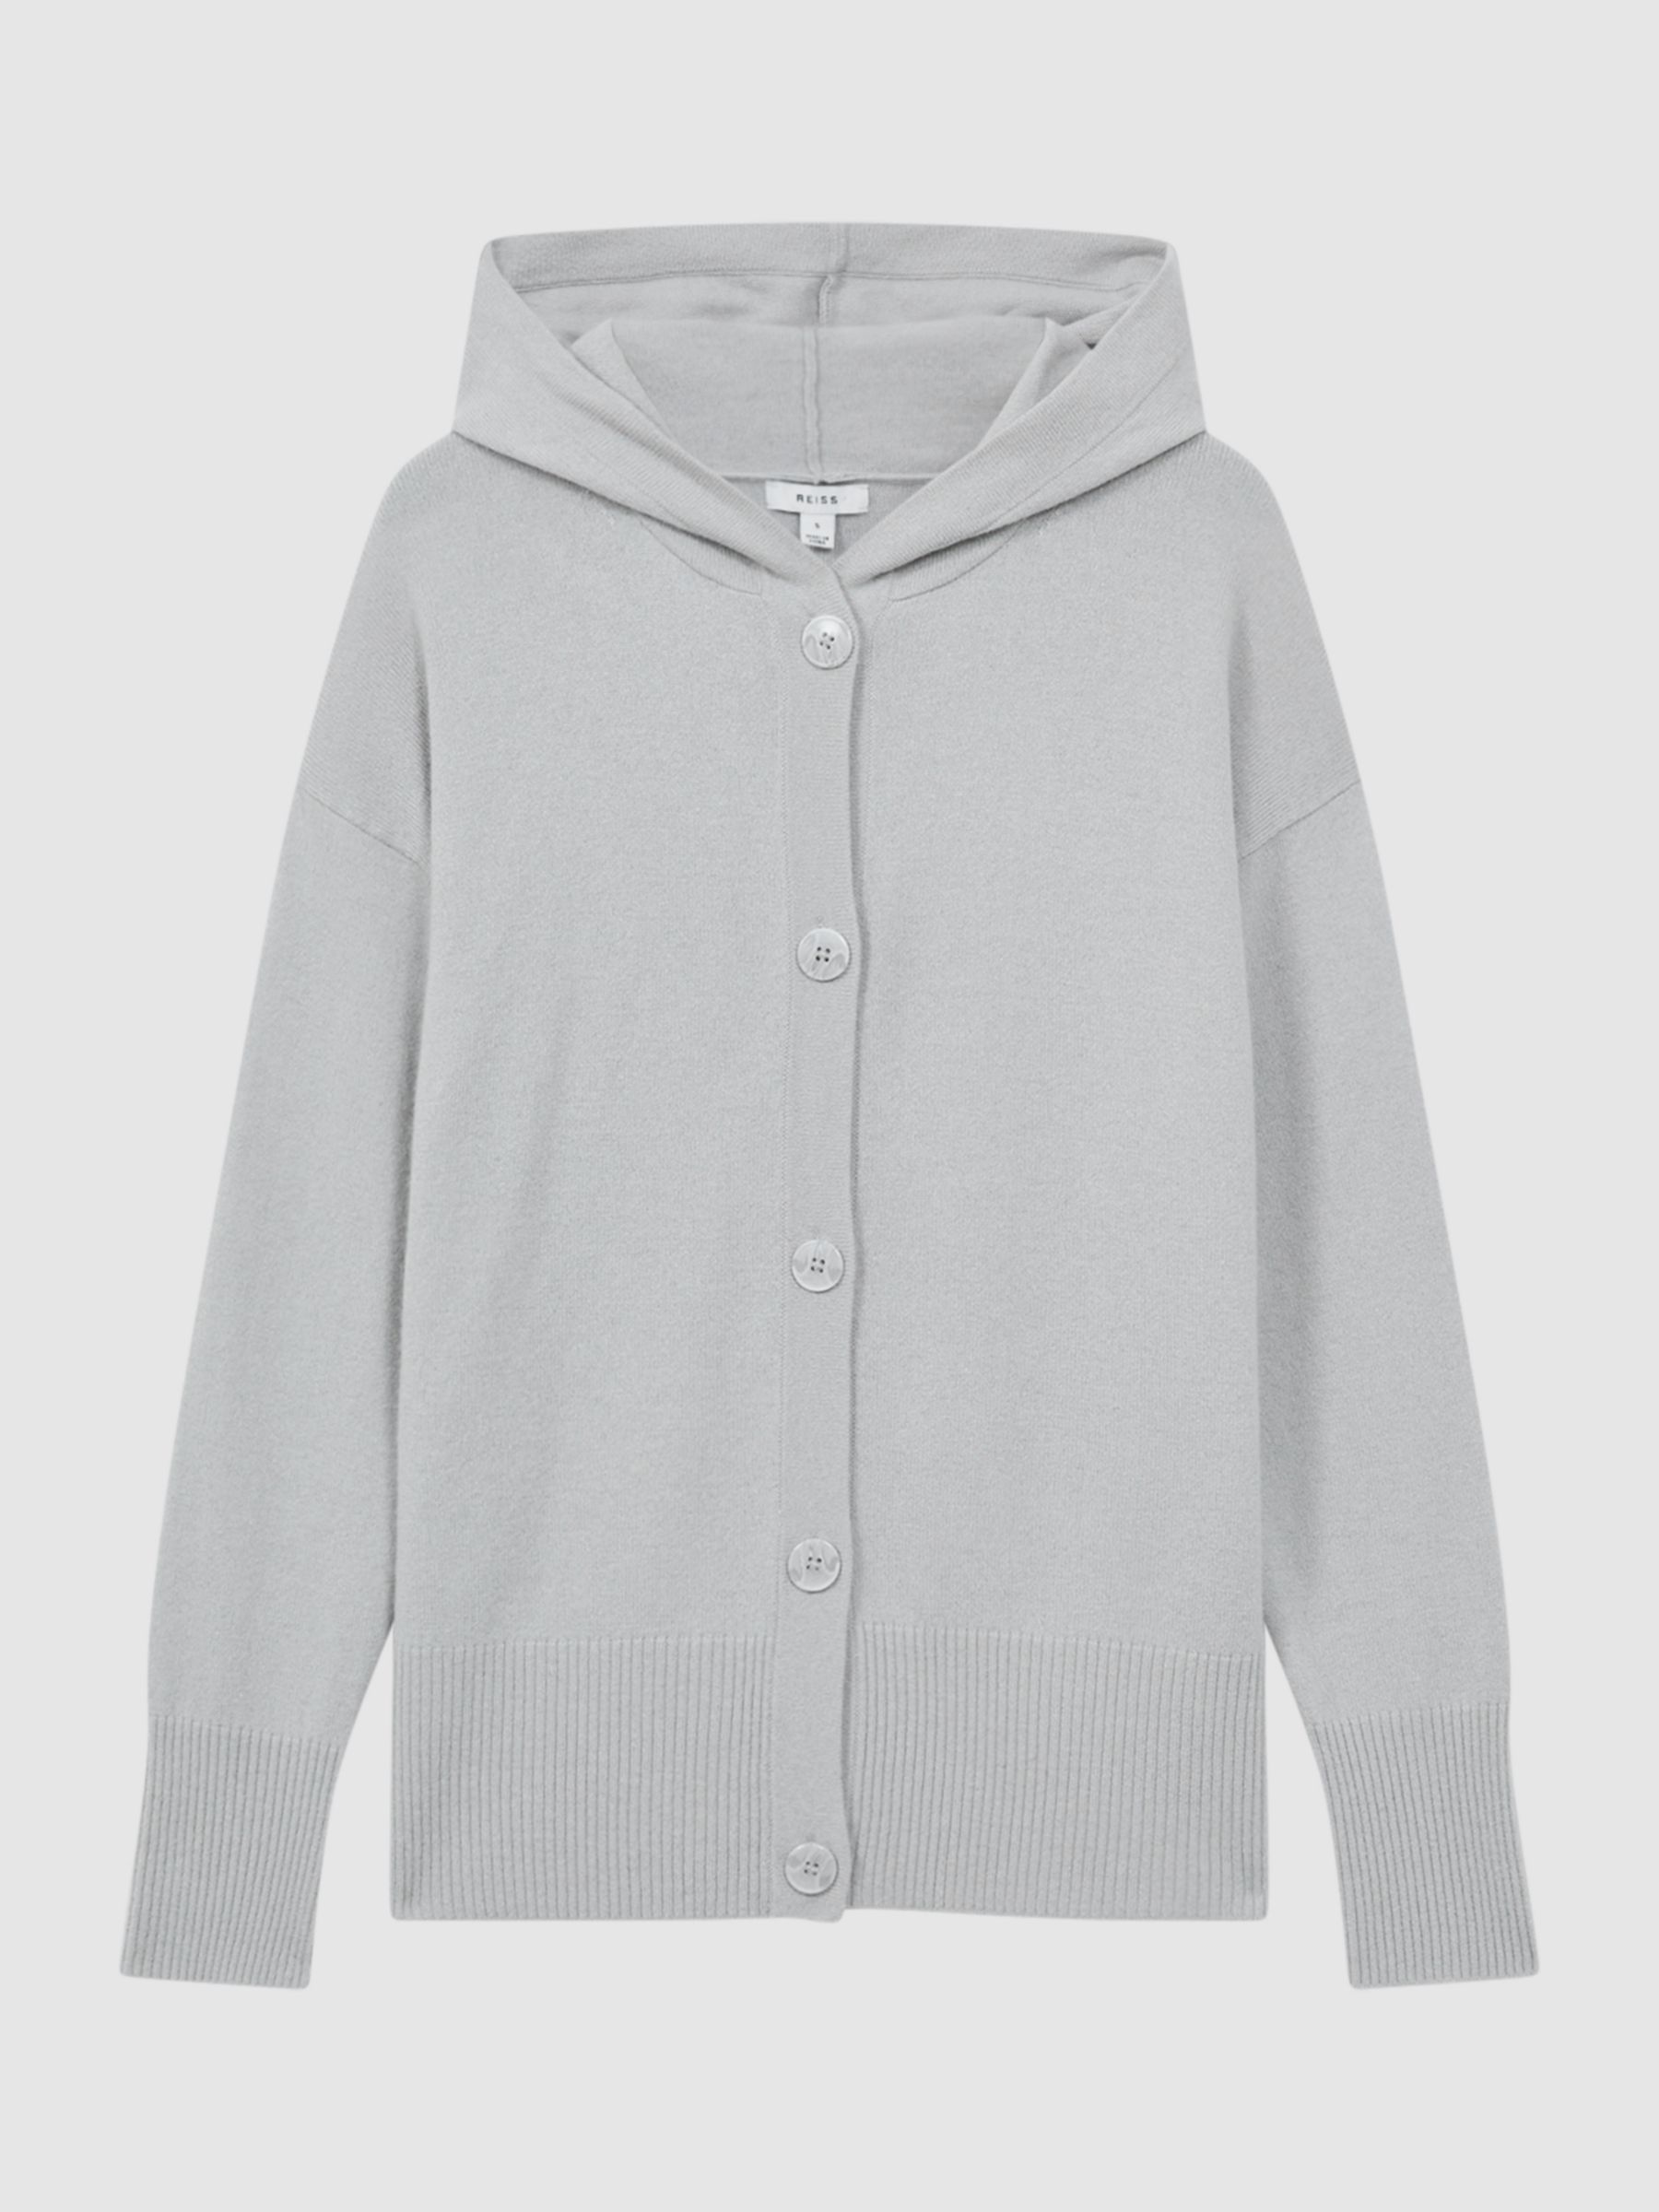 Buy Reiss Evie Wool Cashmere Blend Hooded Cardigan Online at johnlewis.com